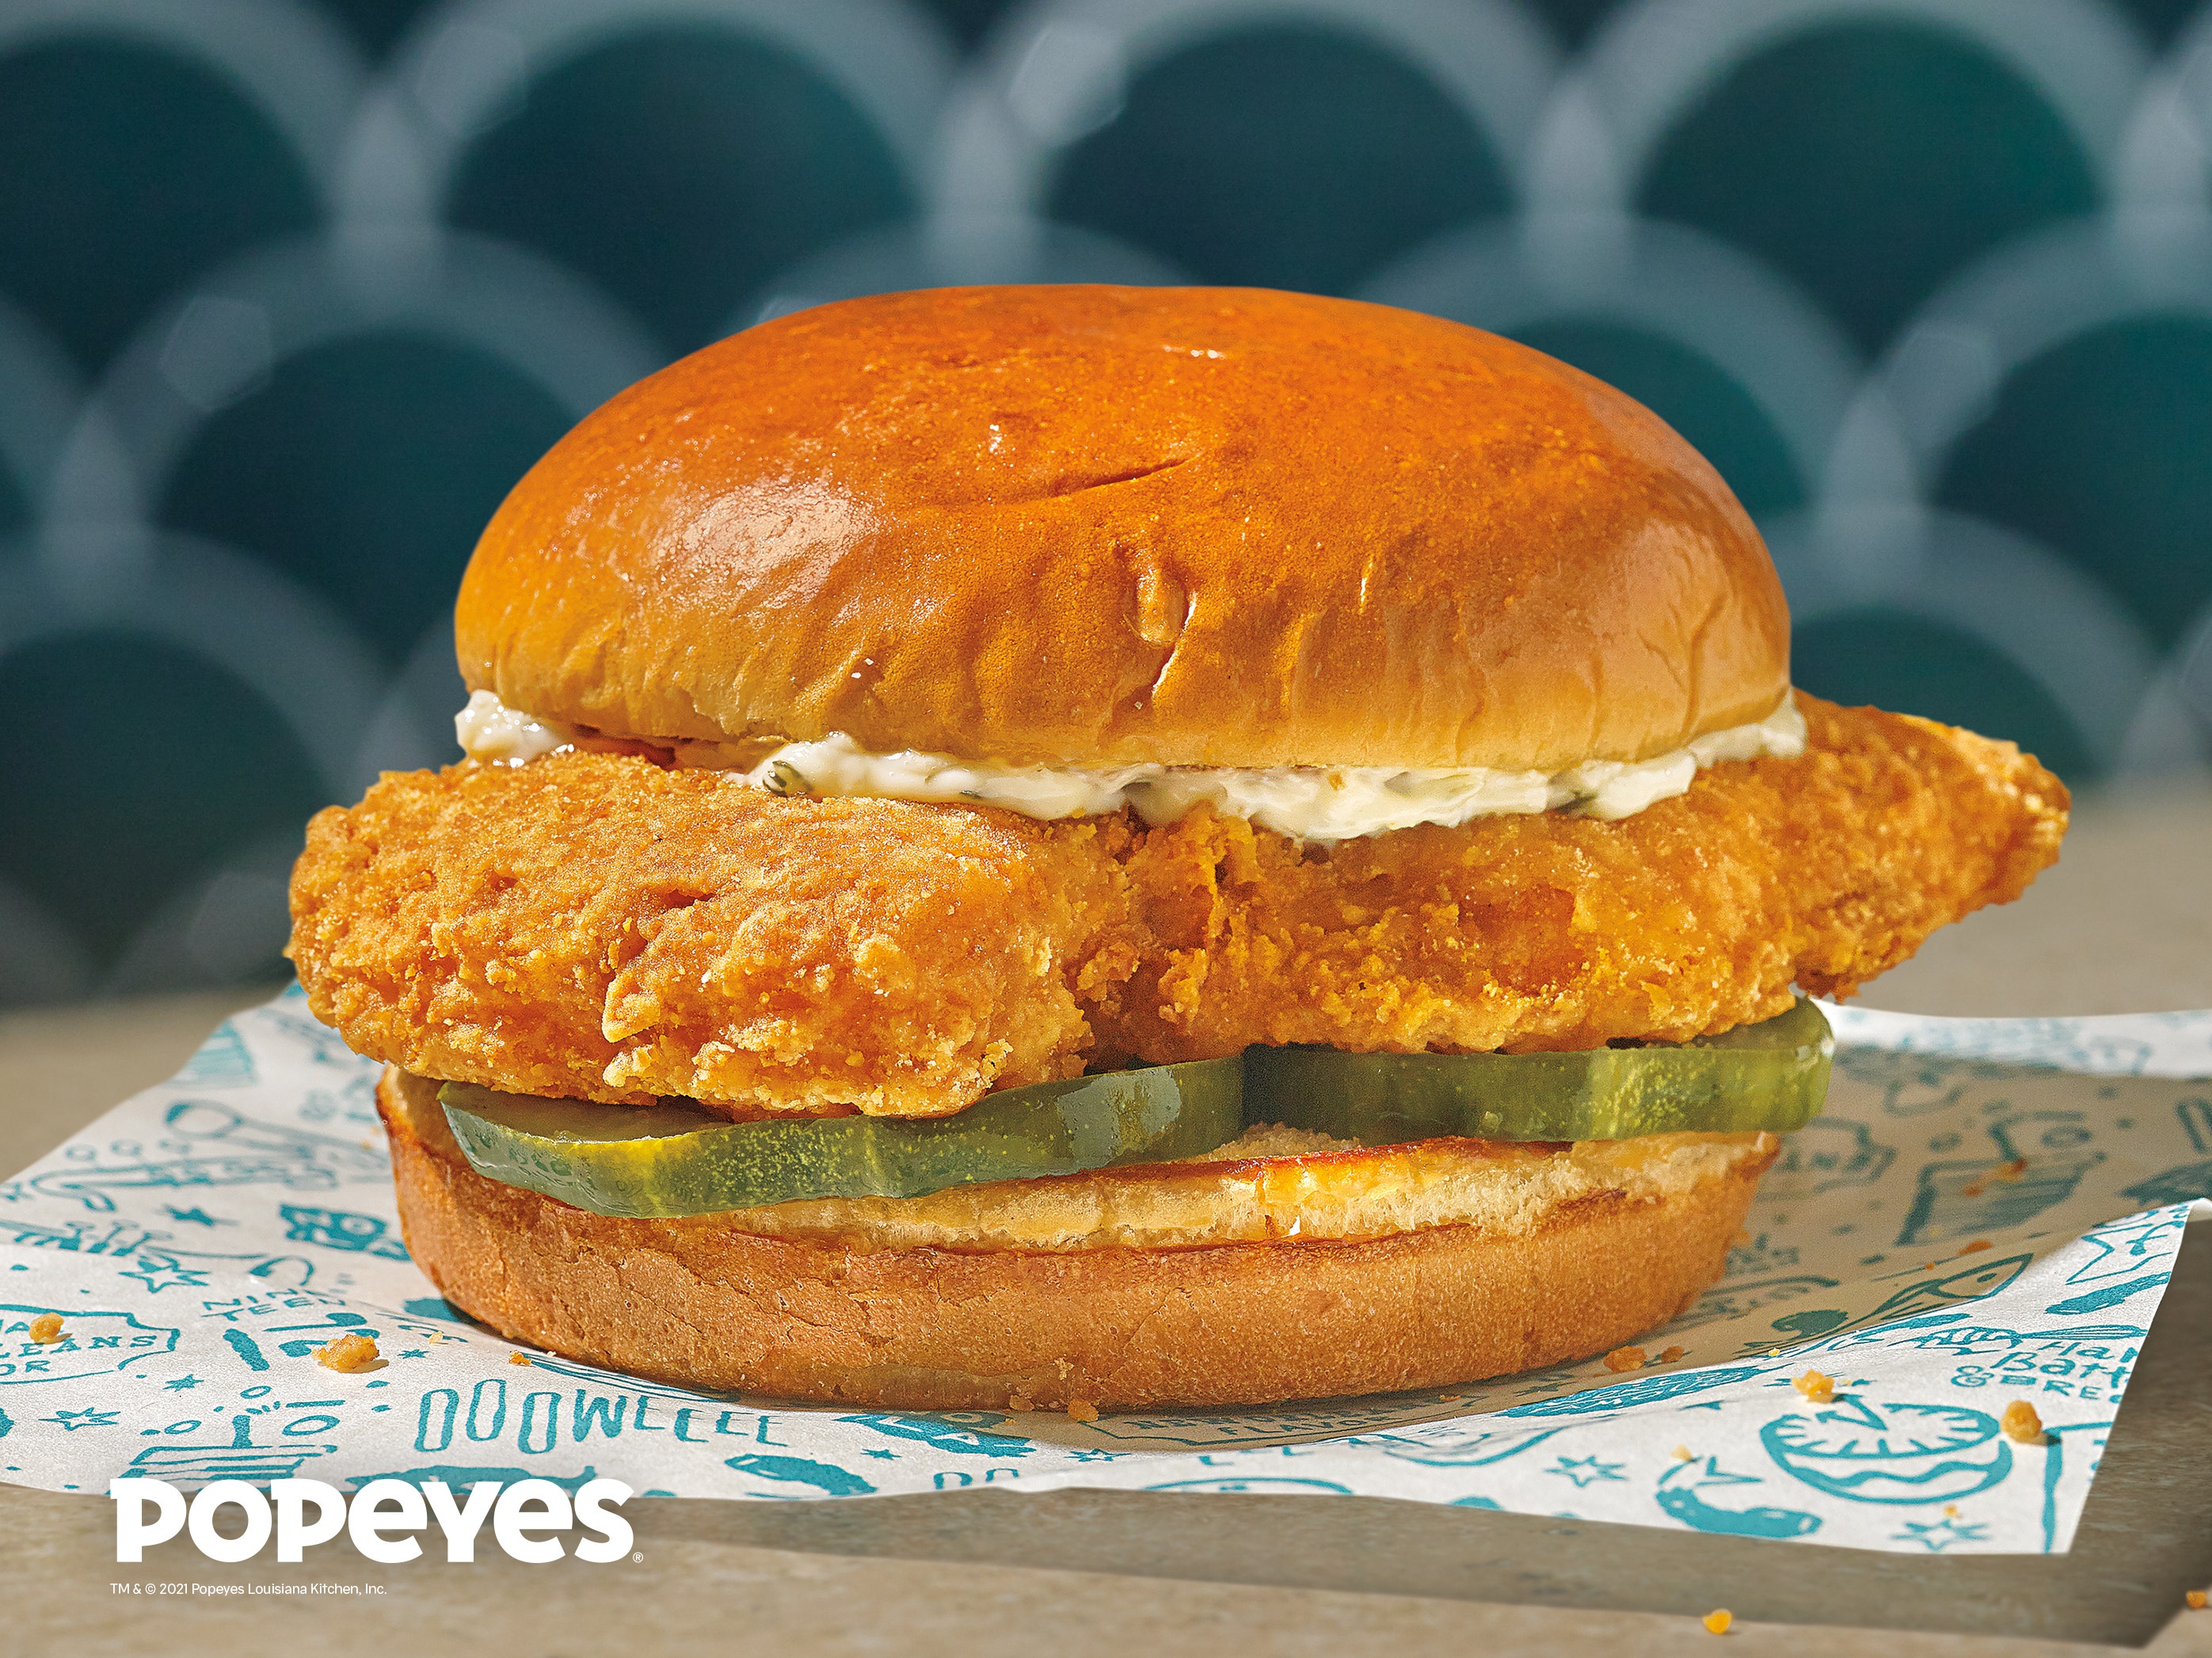 Popeyes follows up his Chicken Sandwich with the first fish sandwich ever